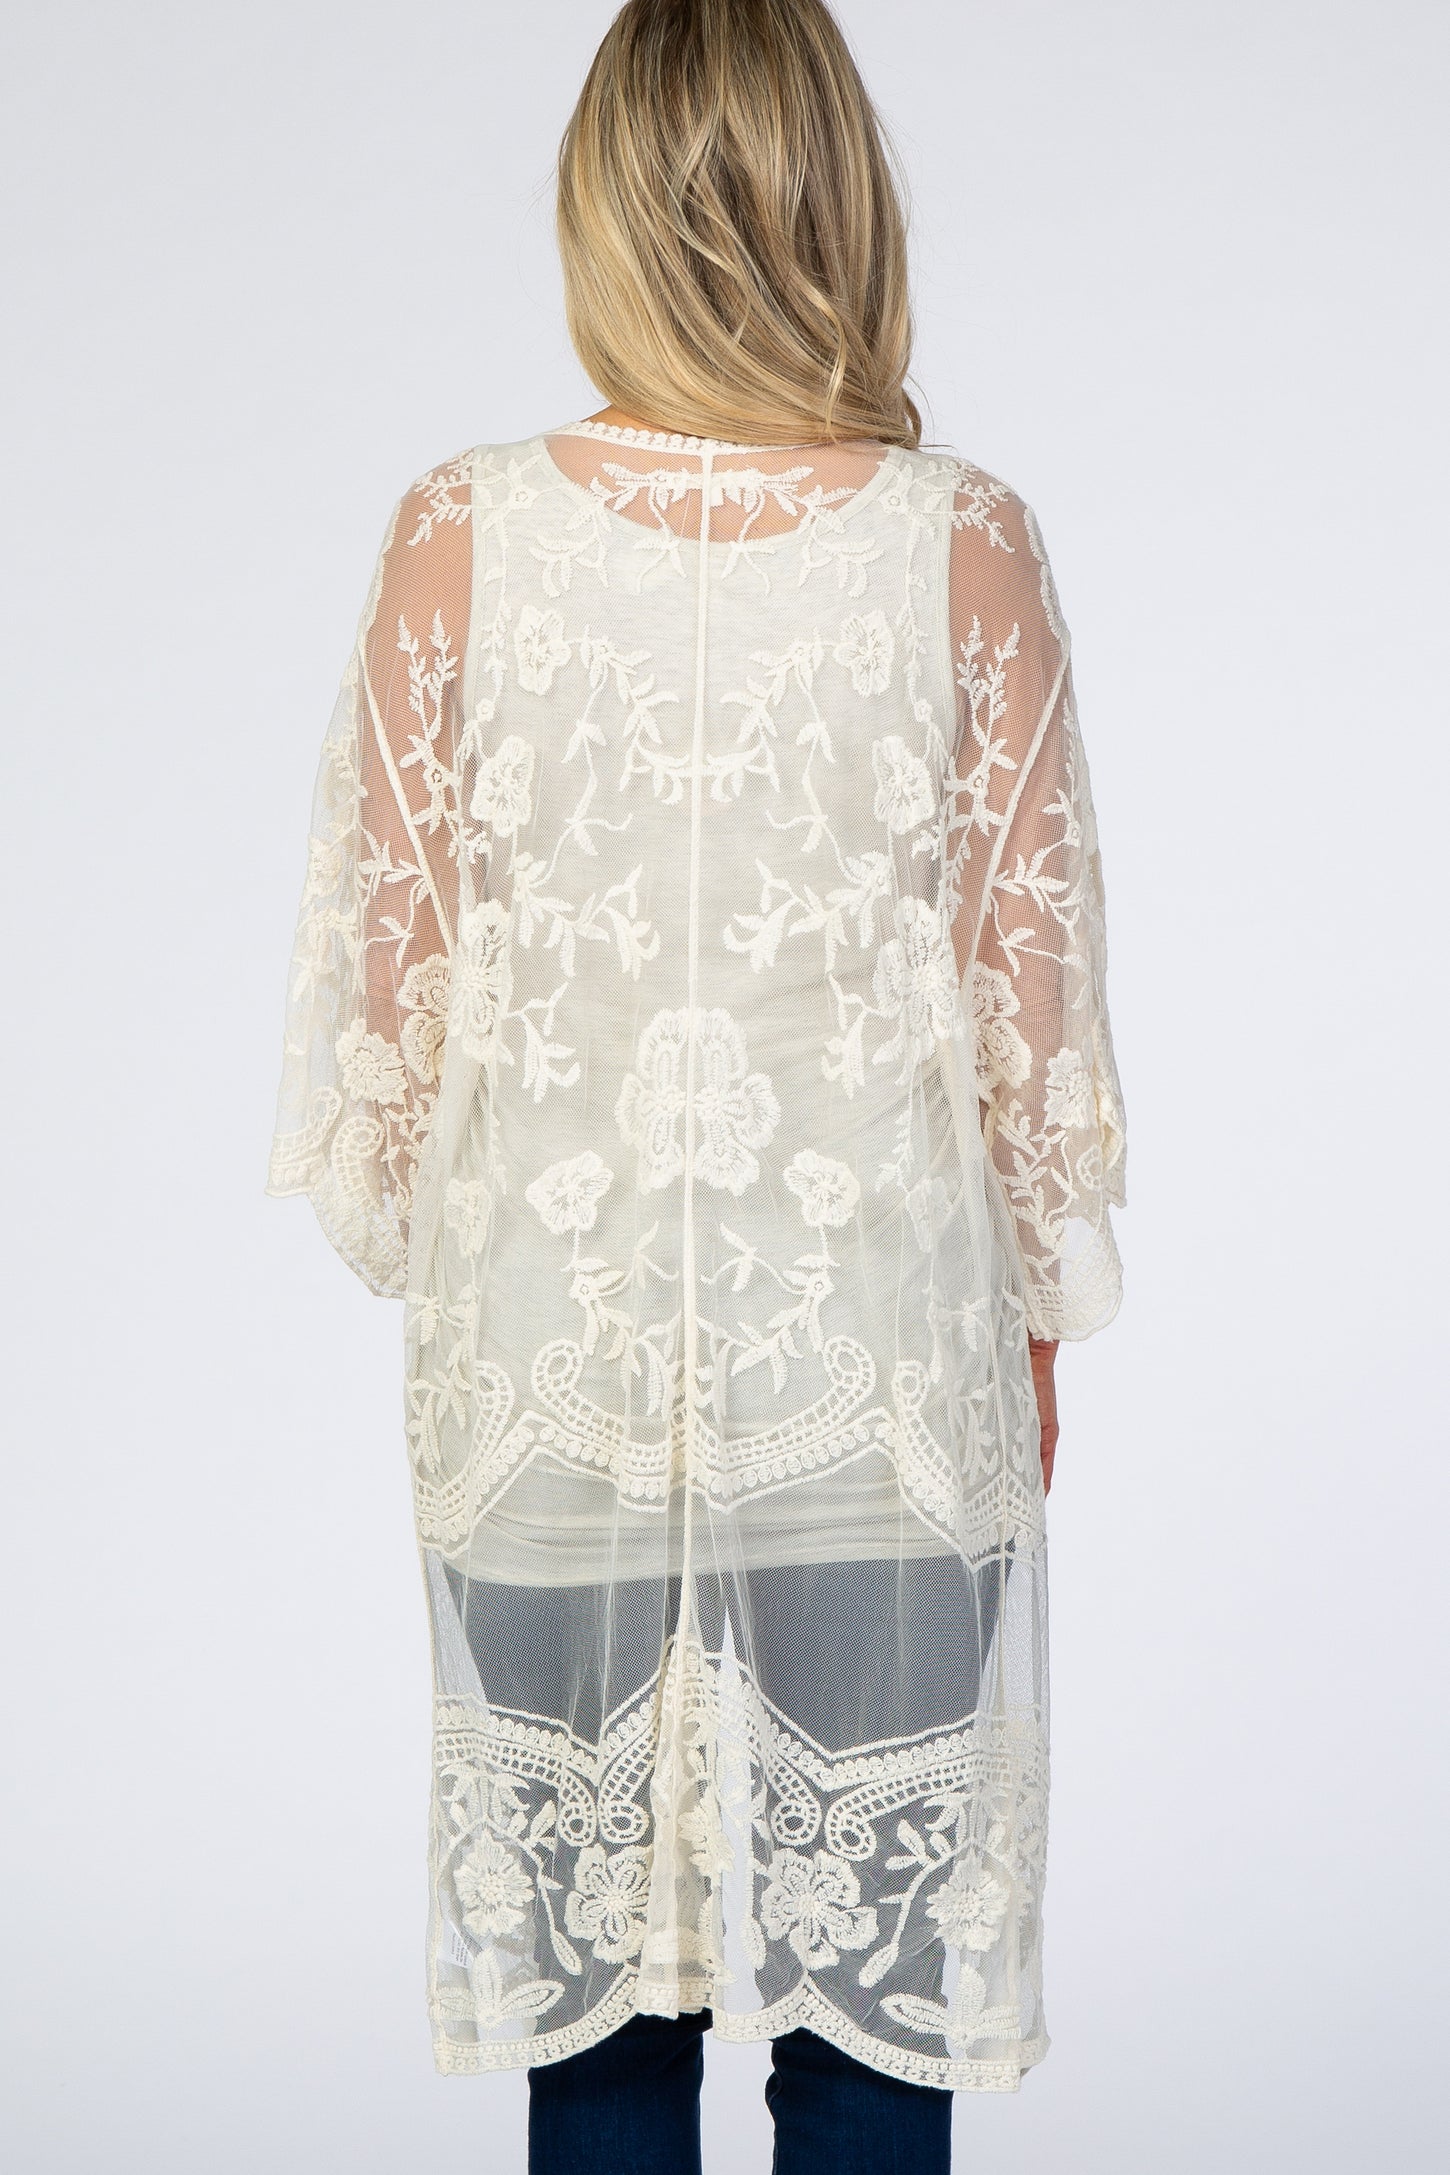 White Lace 3/4 Sleeve Maternity Cover Up